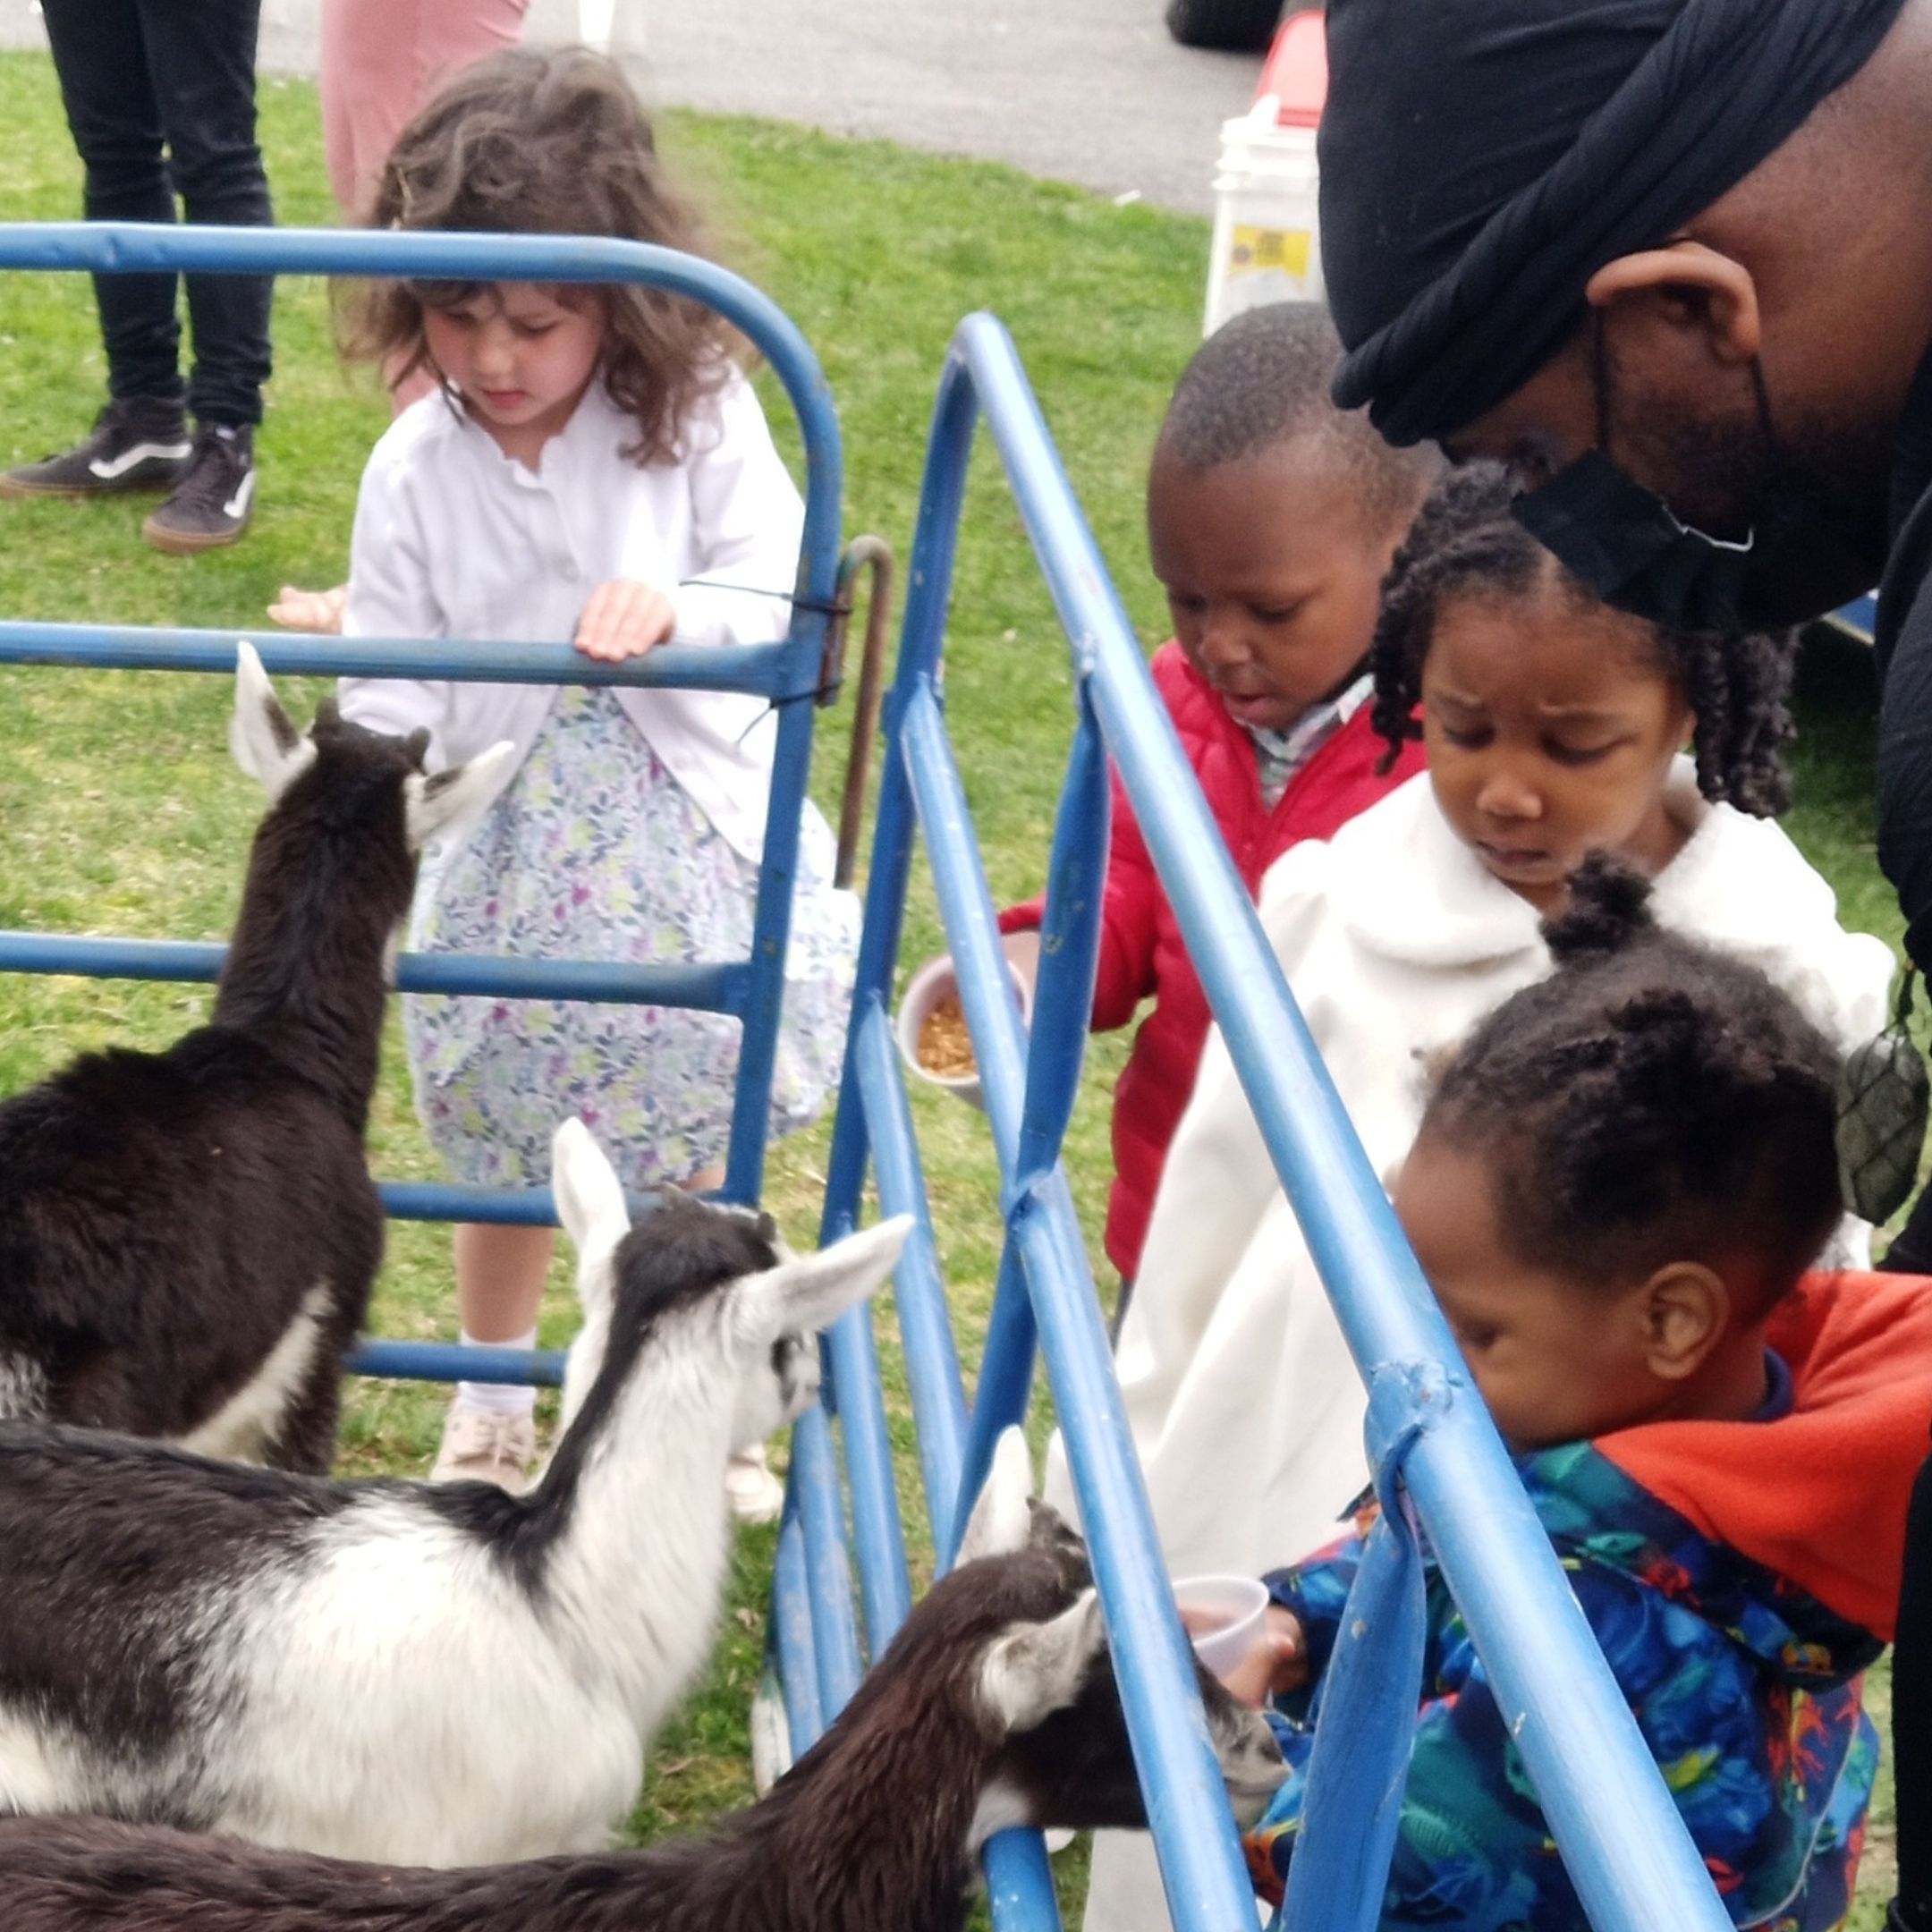 Kids petting goats at Easter petting zoo